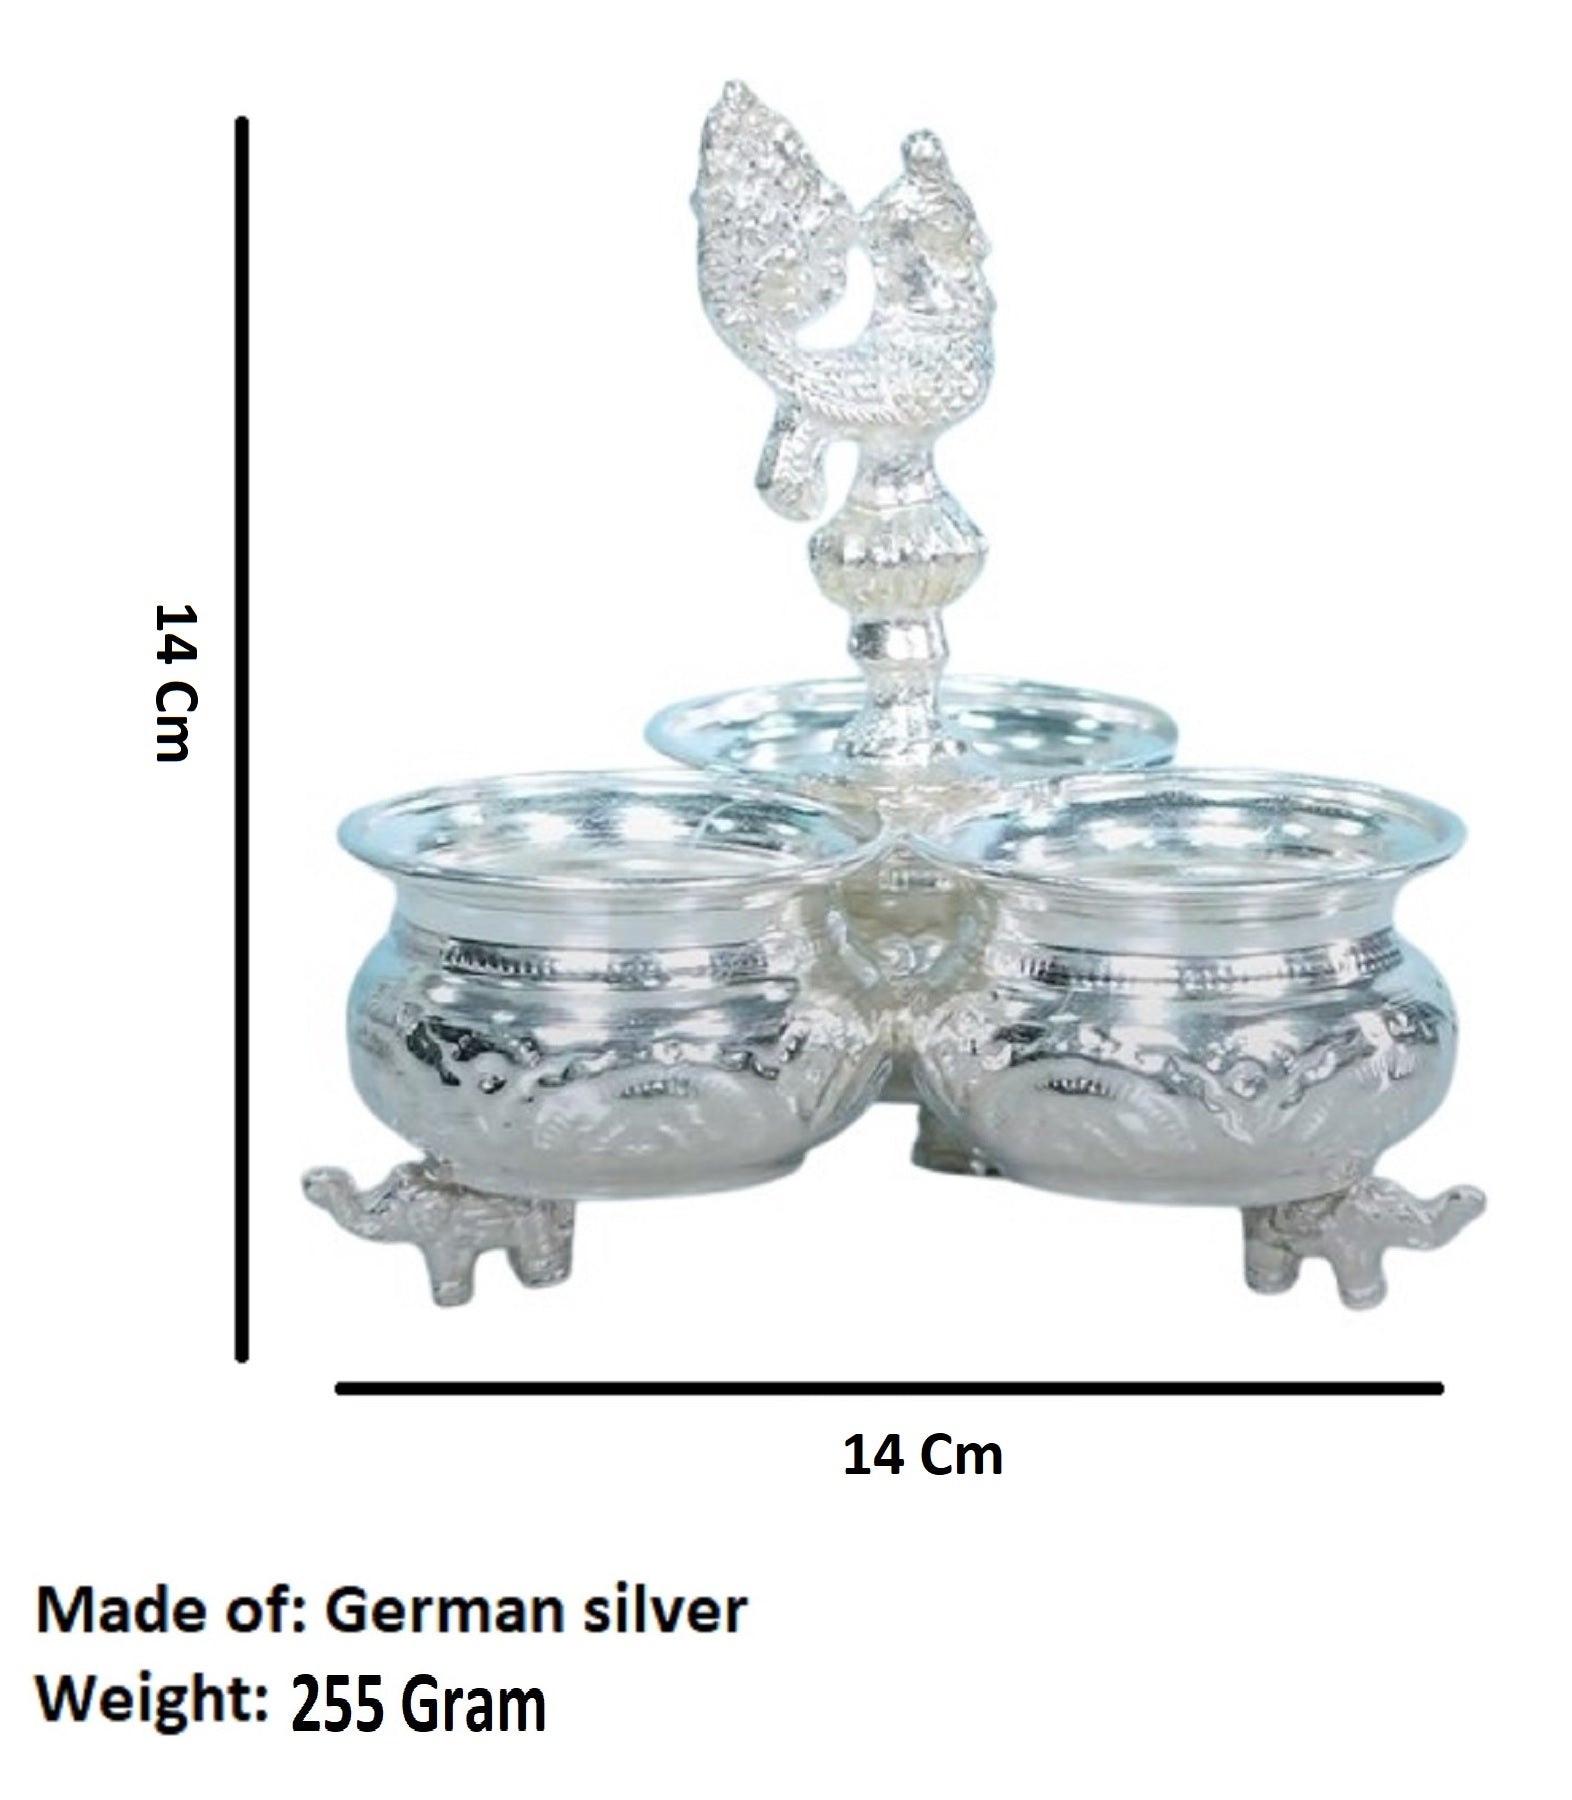 Sigaram German Silver Panchwala Cup with Peacock Handle For Pooja Thali, Festival Decoration, Office and Return Gift K4003